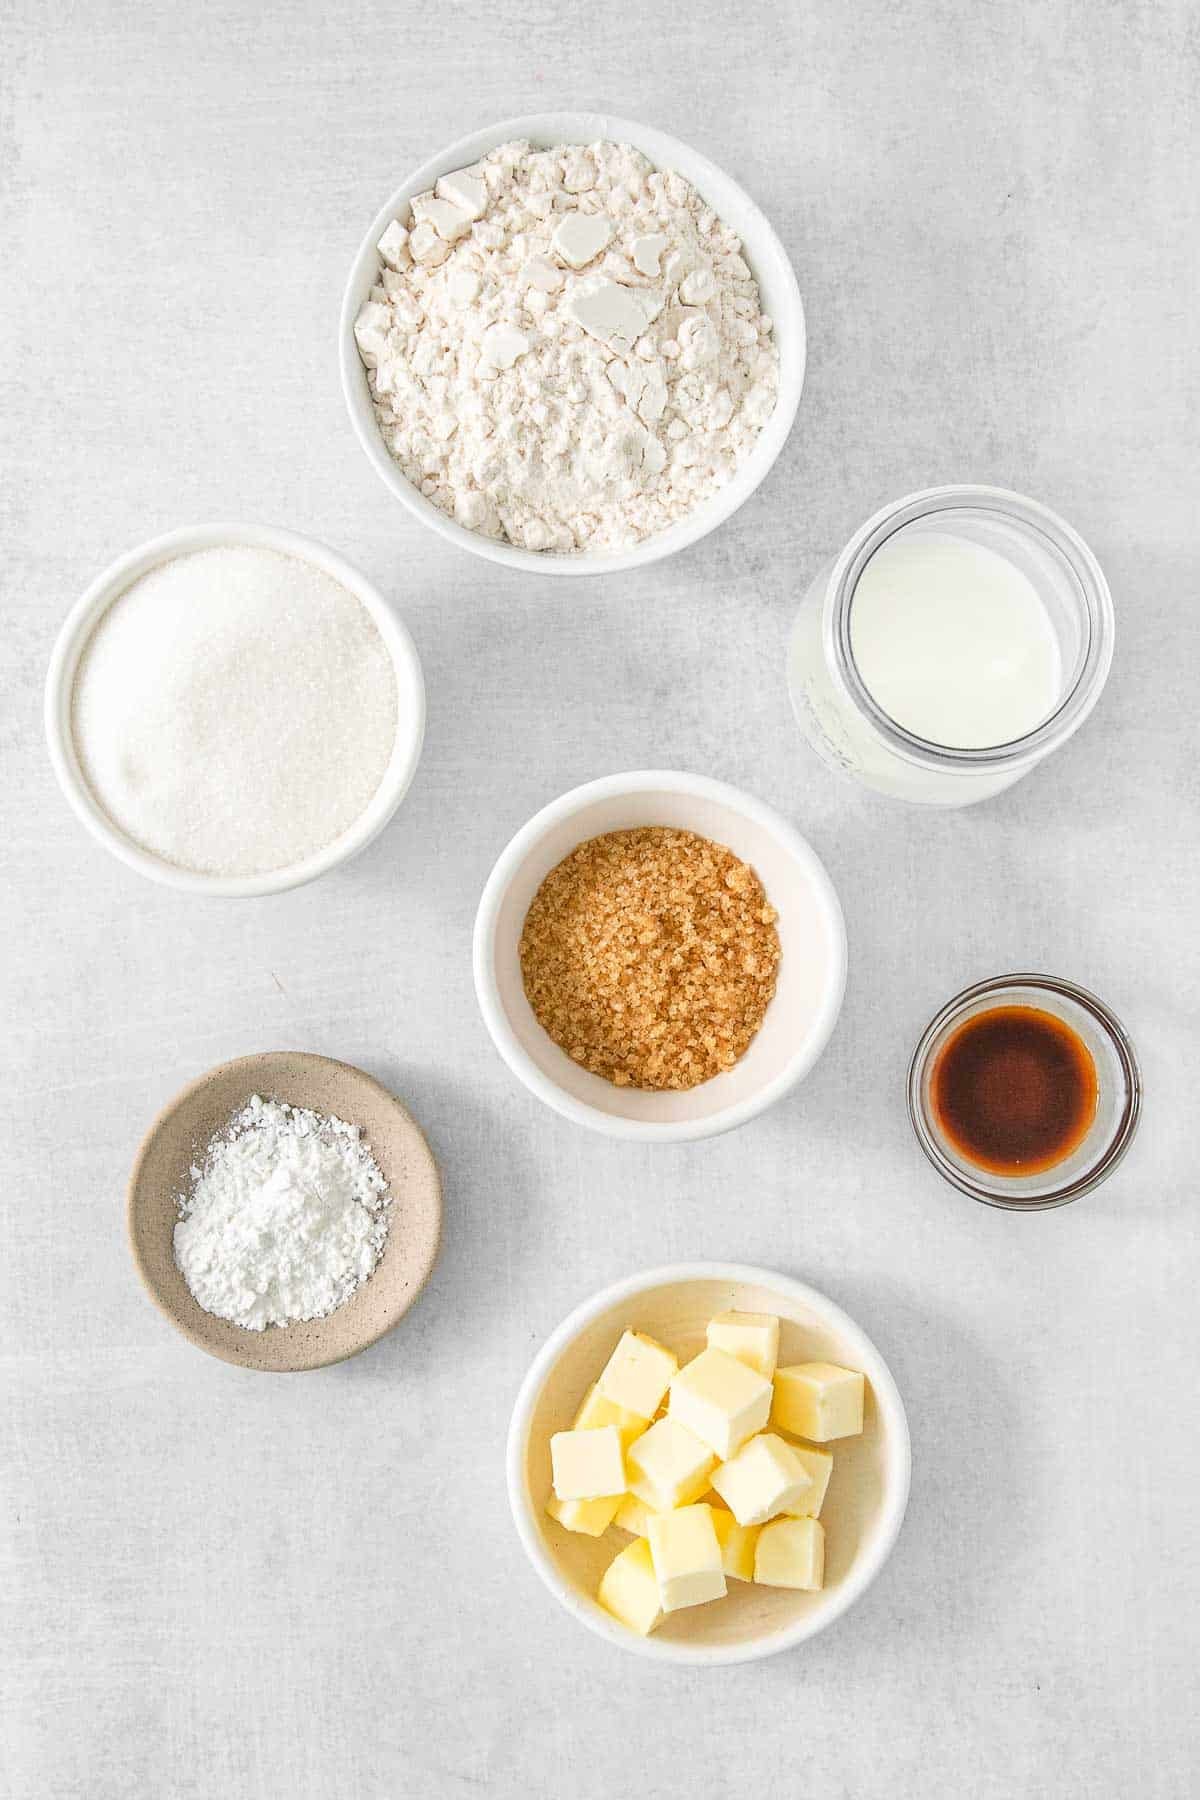 Several bowls of ingredient for cobbler topping - Flour, Sugar, Baking Powder, Butter, Milk, Vanilla Extract and Turbinado.